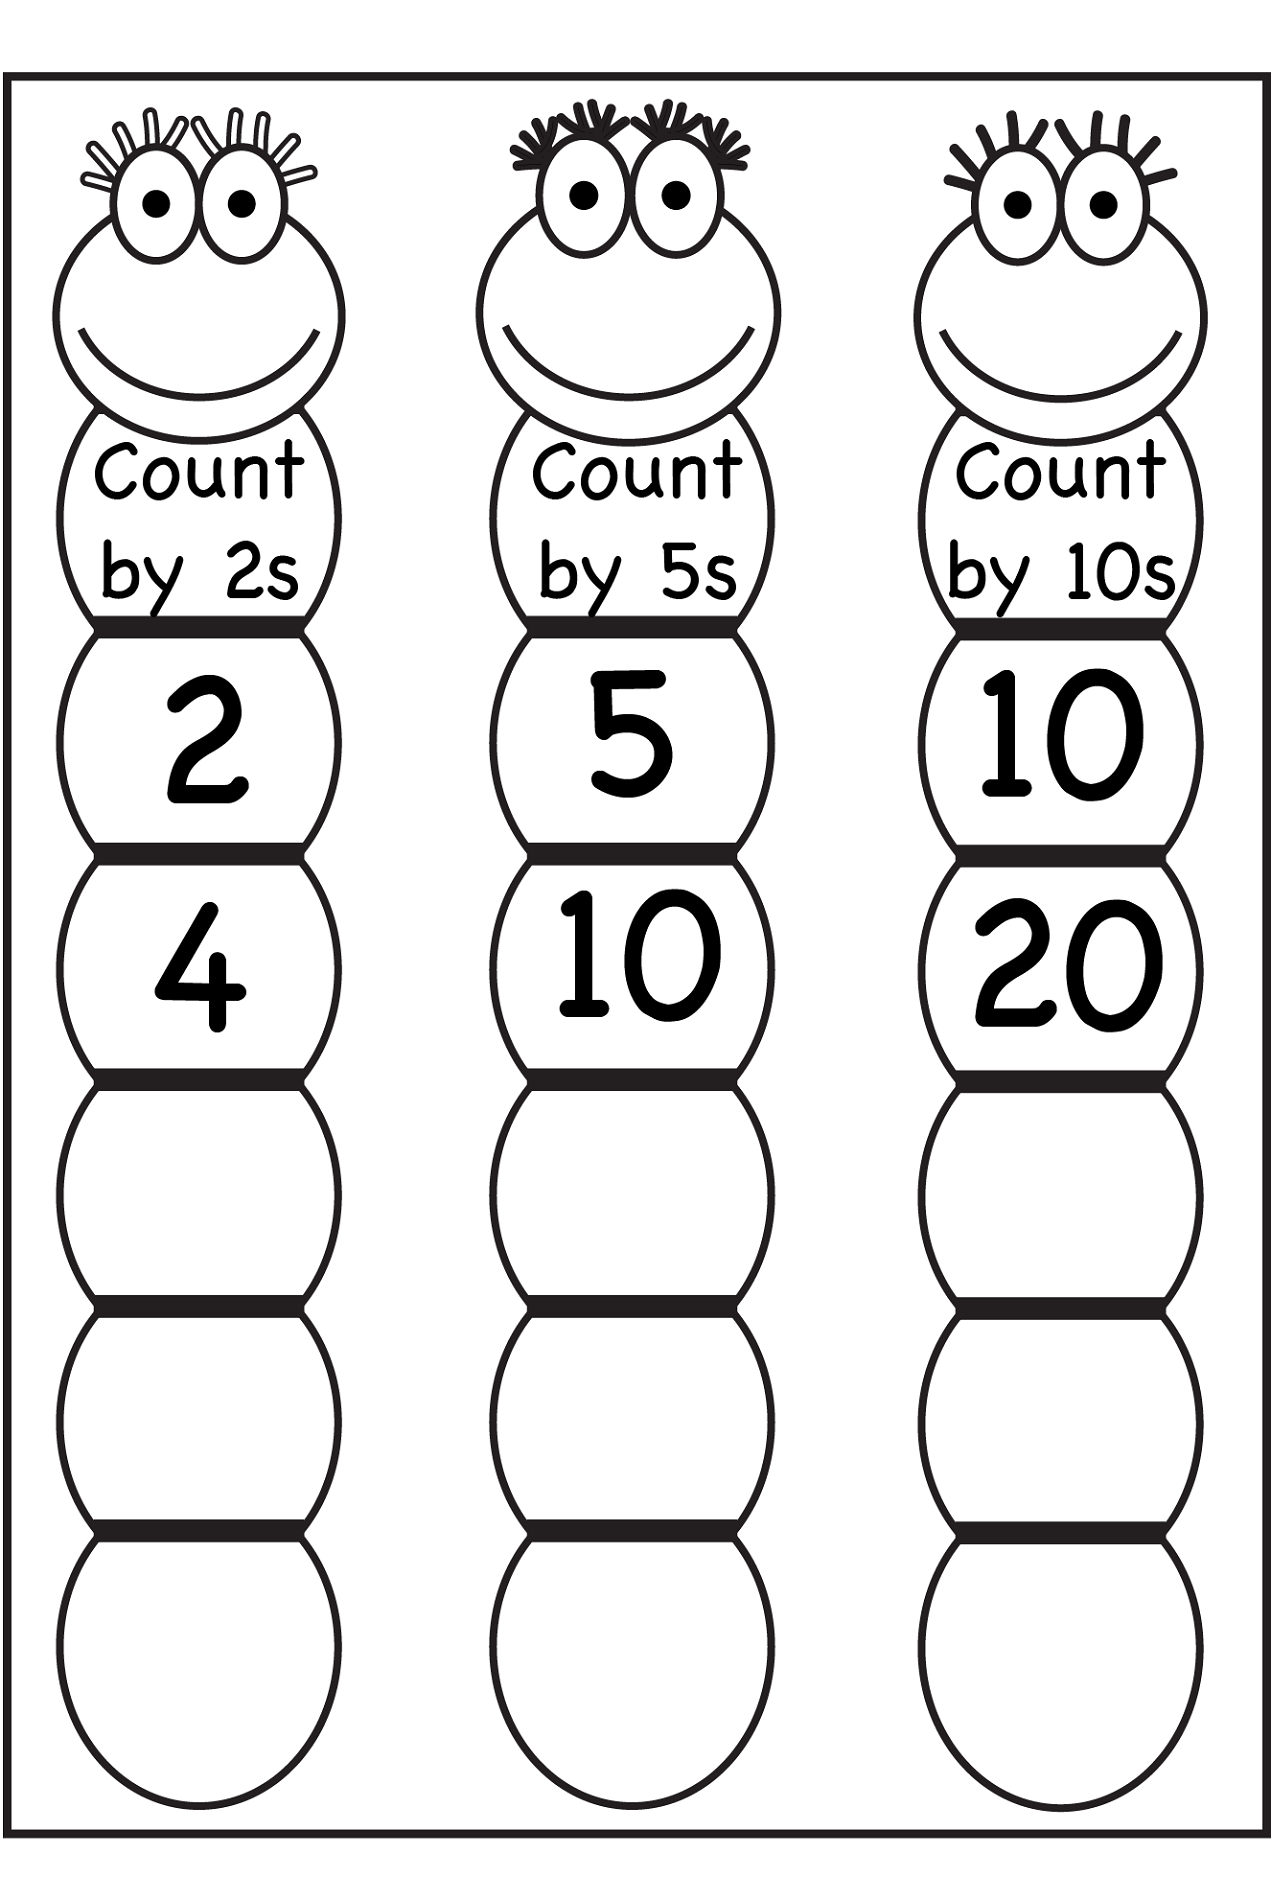 printable-skip-count-by-5-worksheets-activity-shelter-counting-in-2s